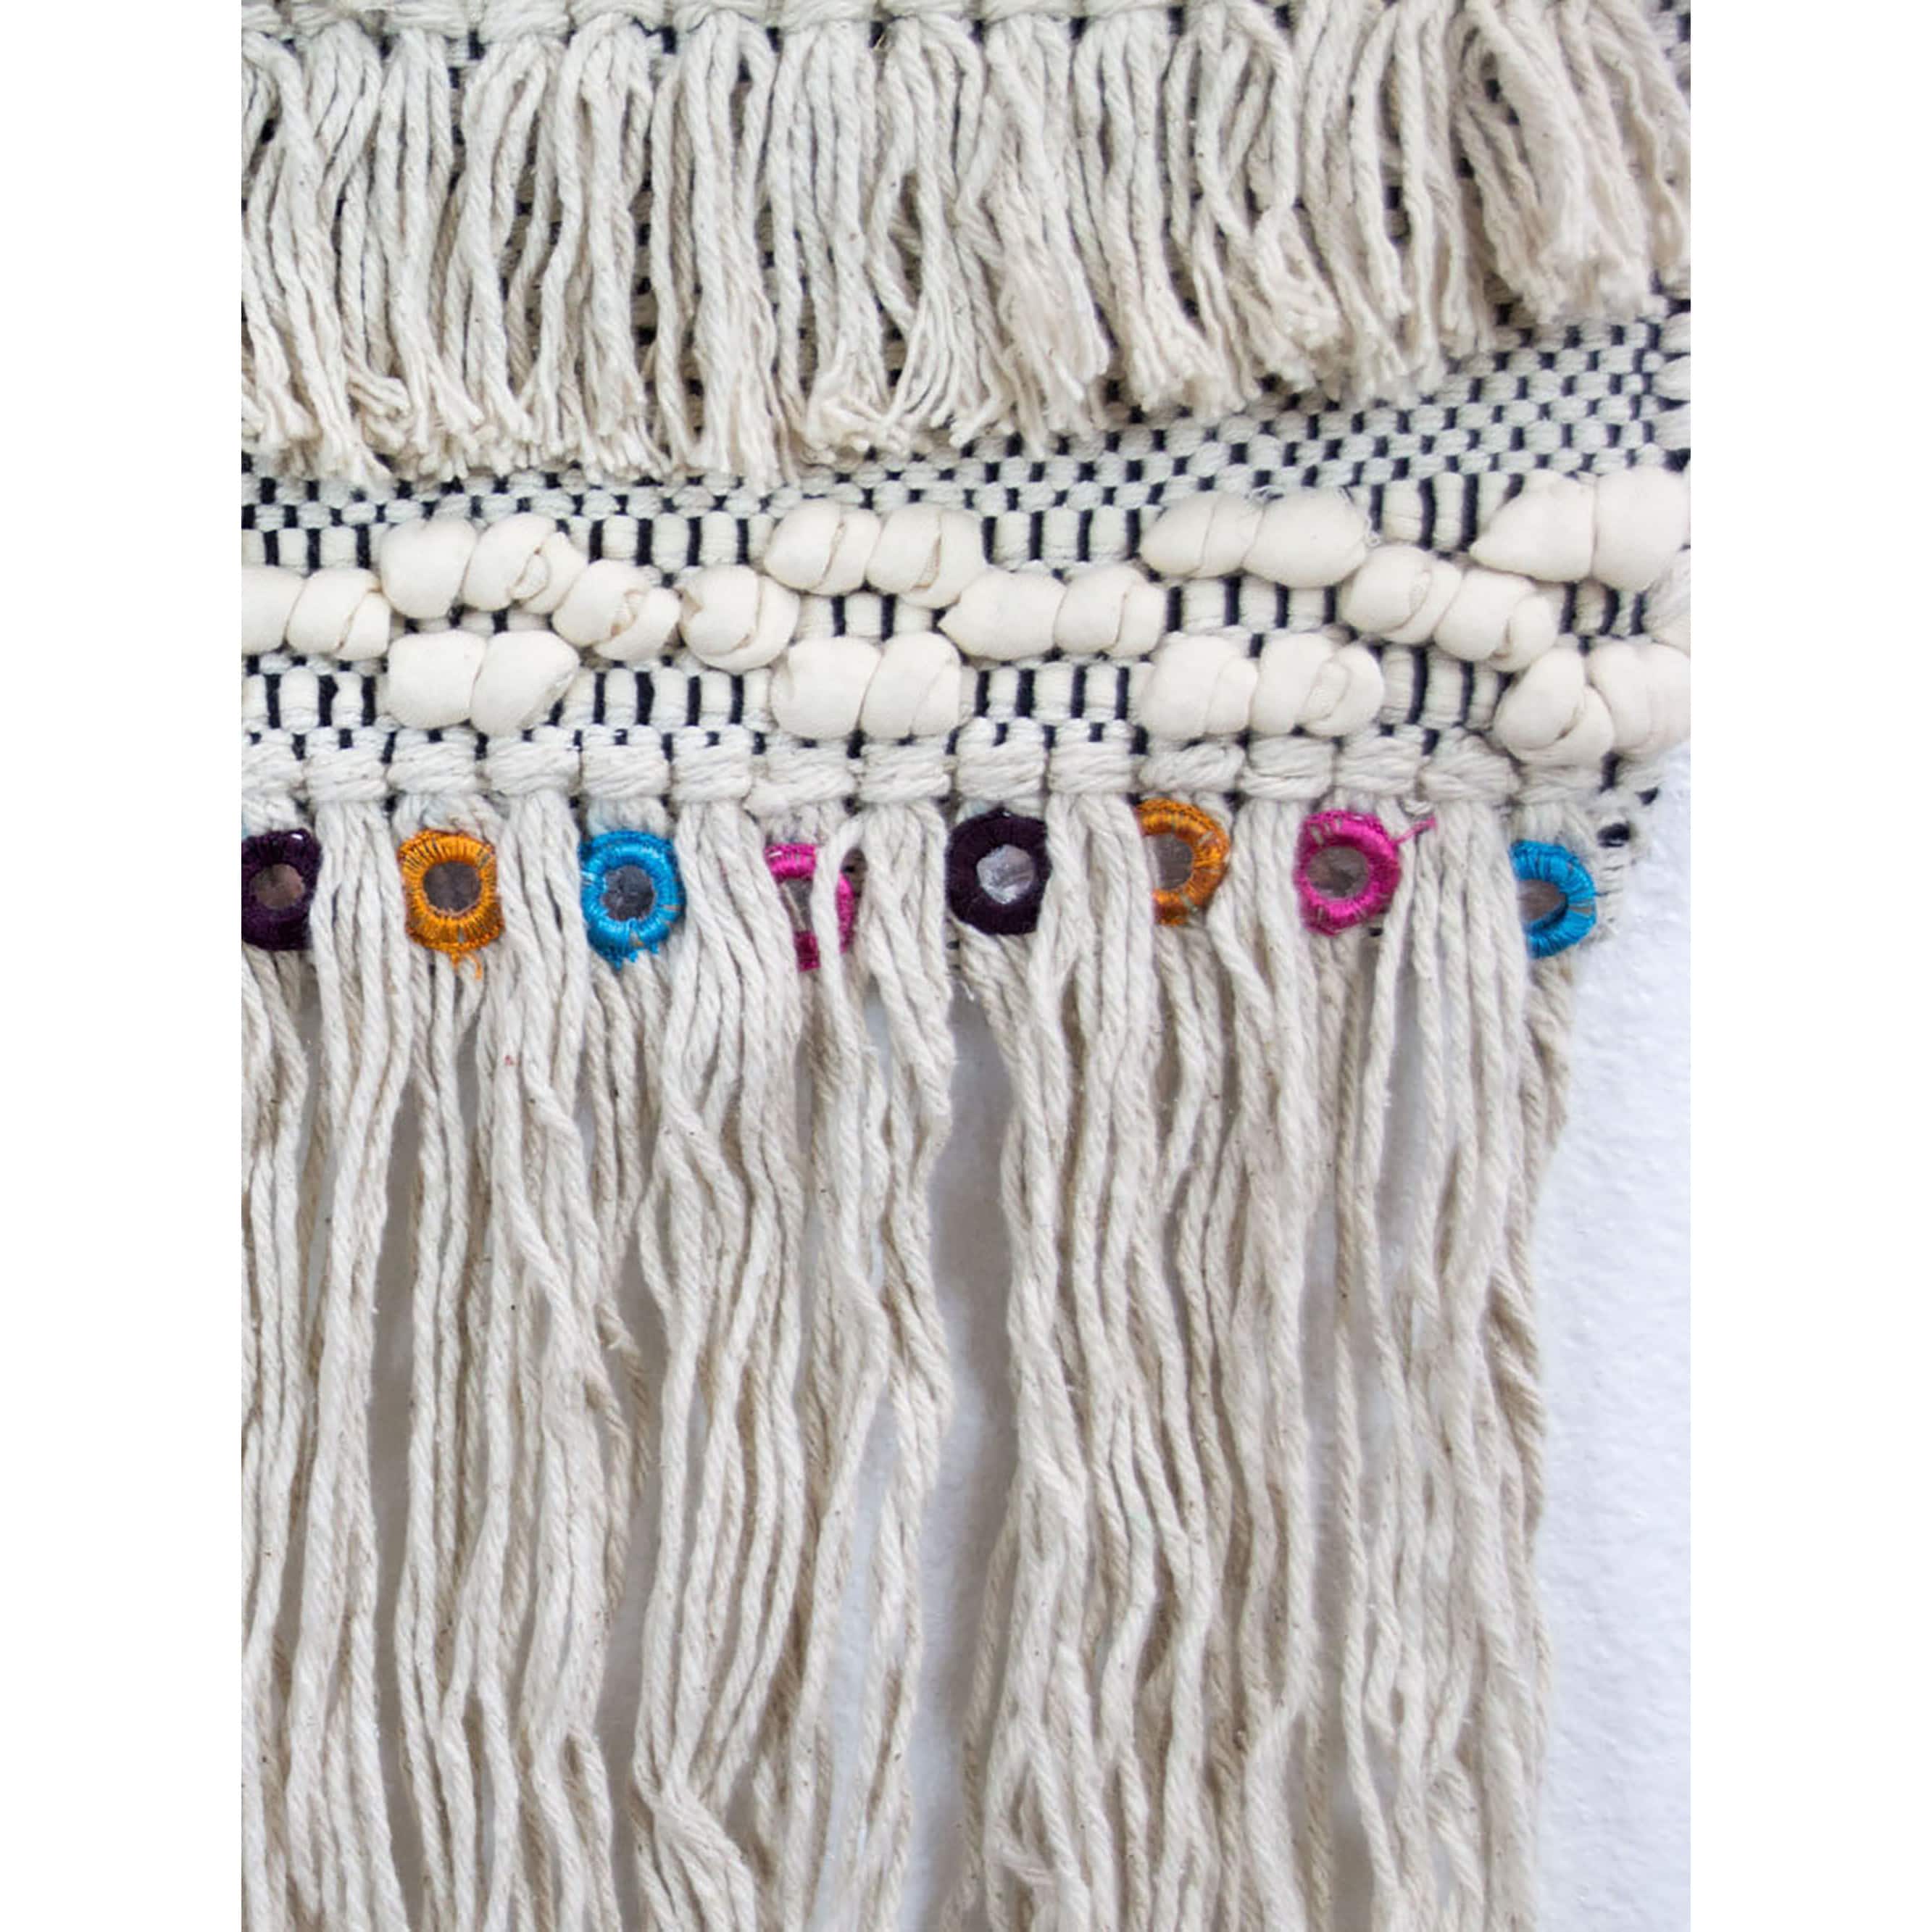 Marmont Hill - Handmade Colorful Macrame Wall Hanging - Bed Bath ...